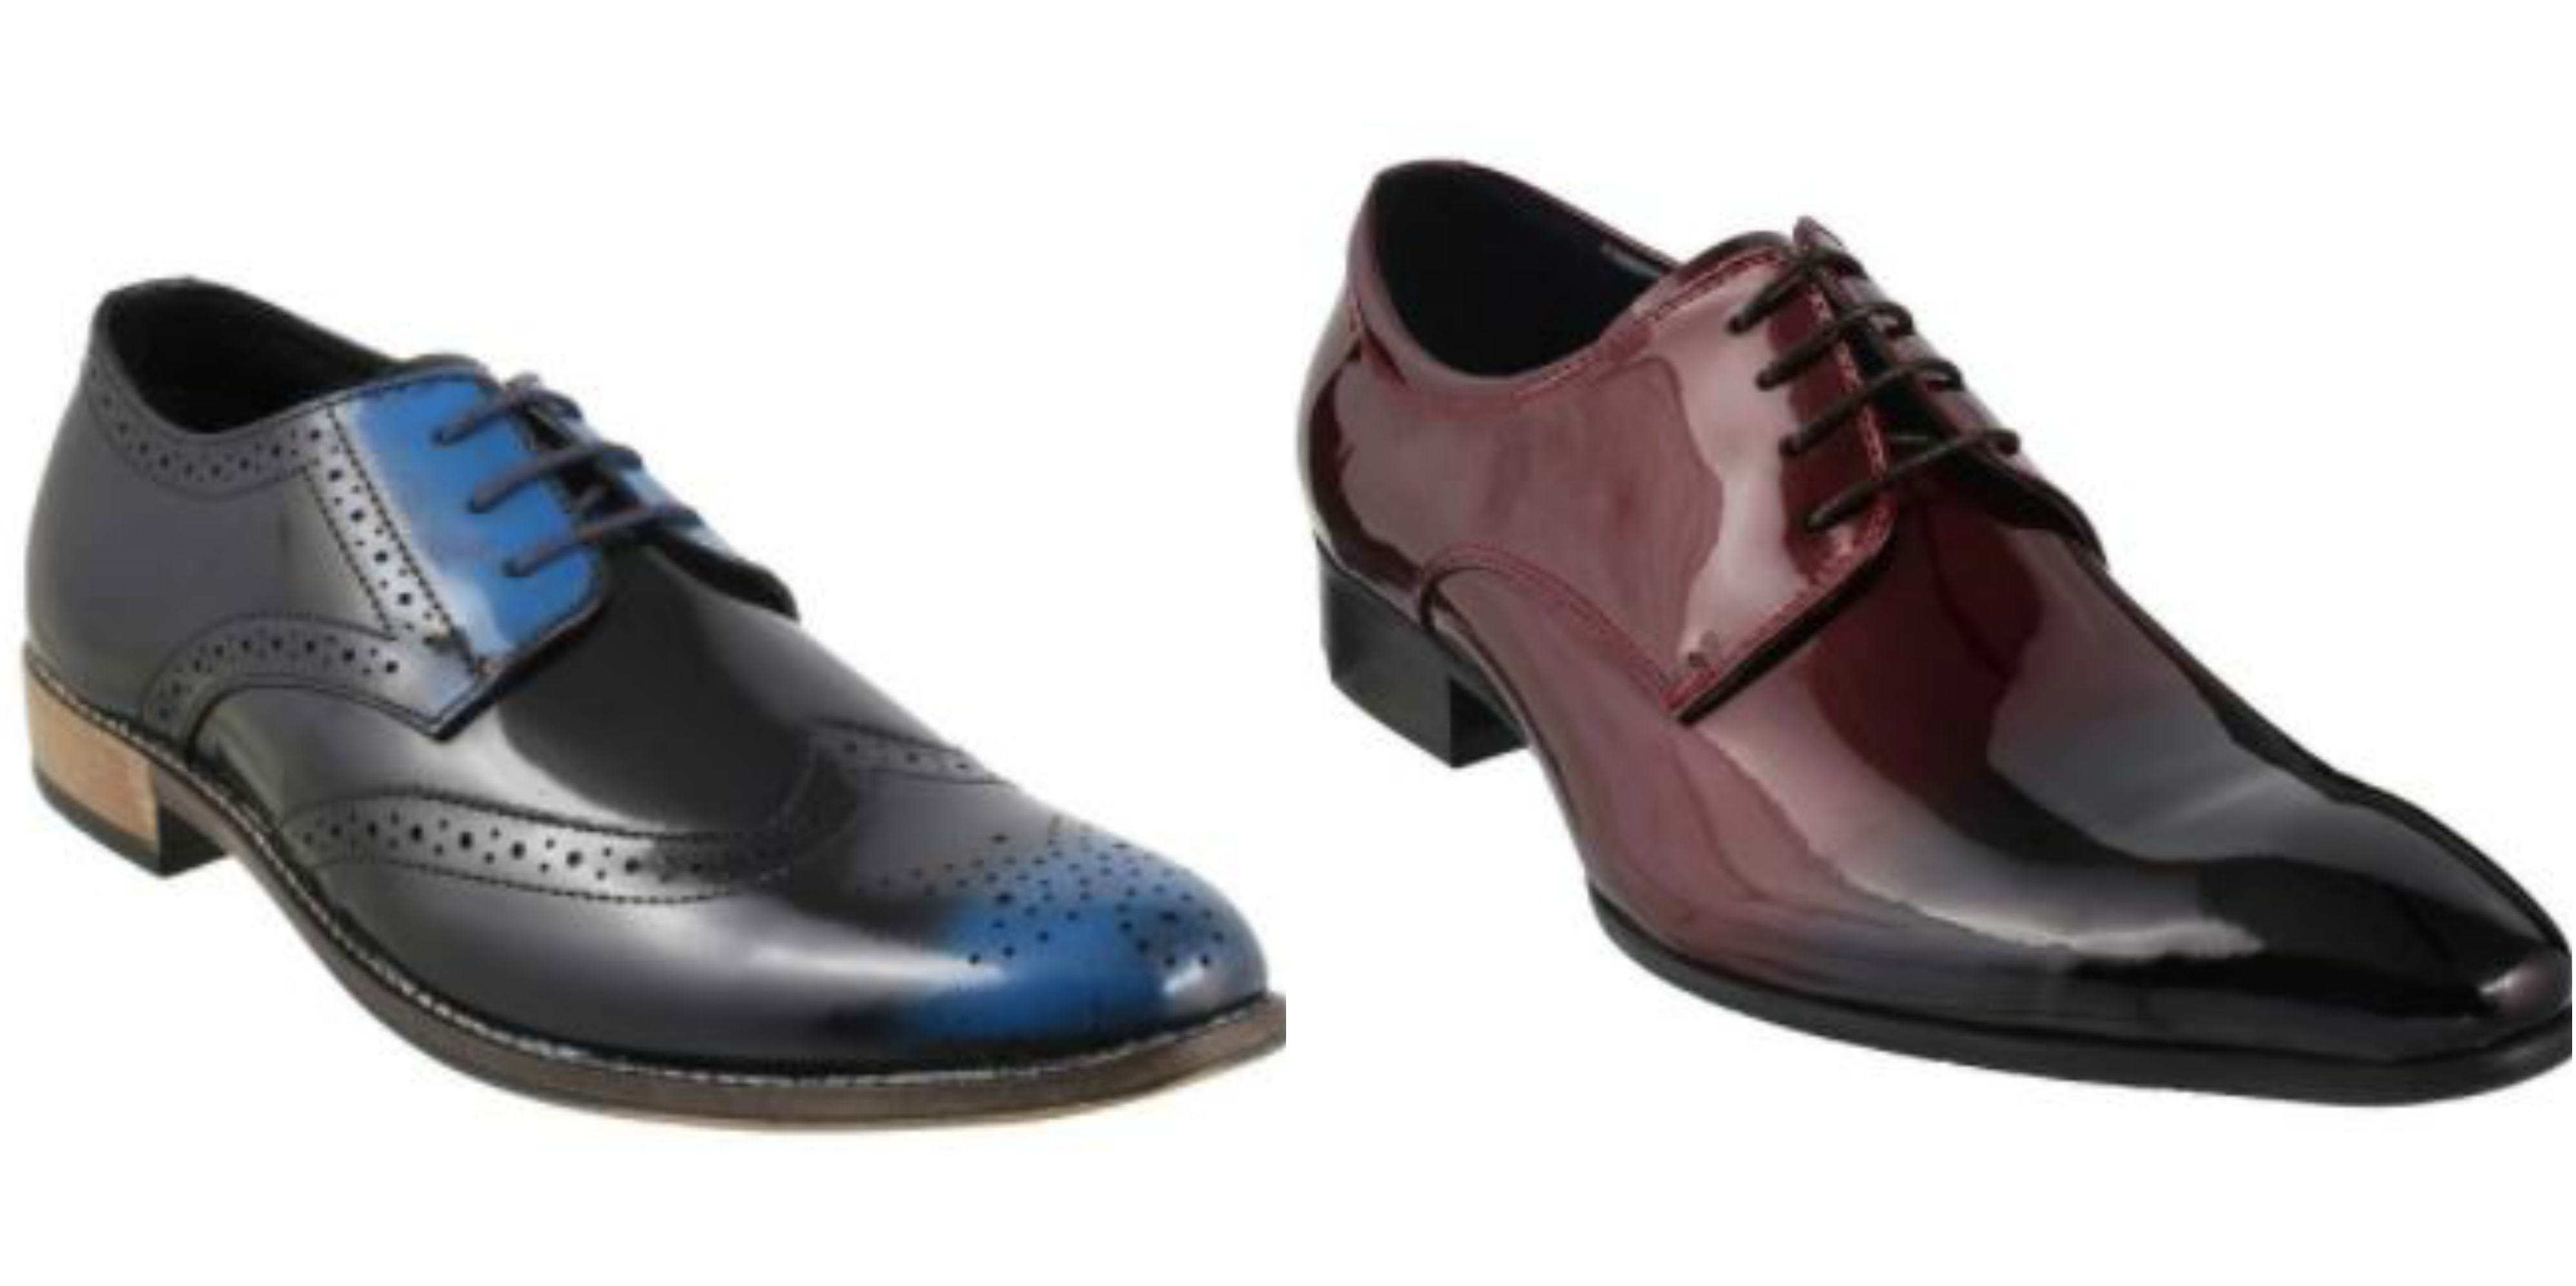 Two-Toned Formal Shoes